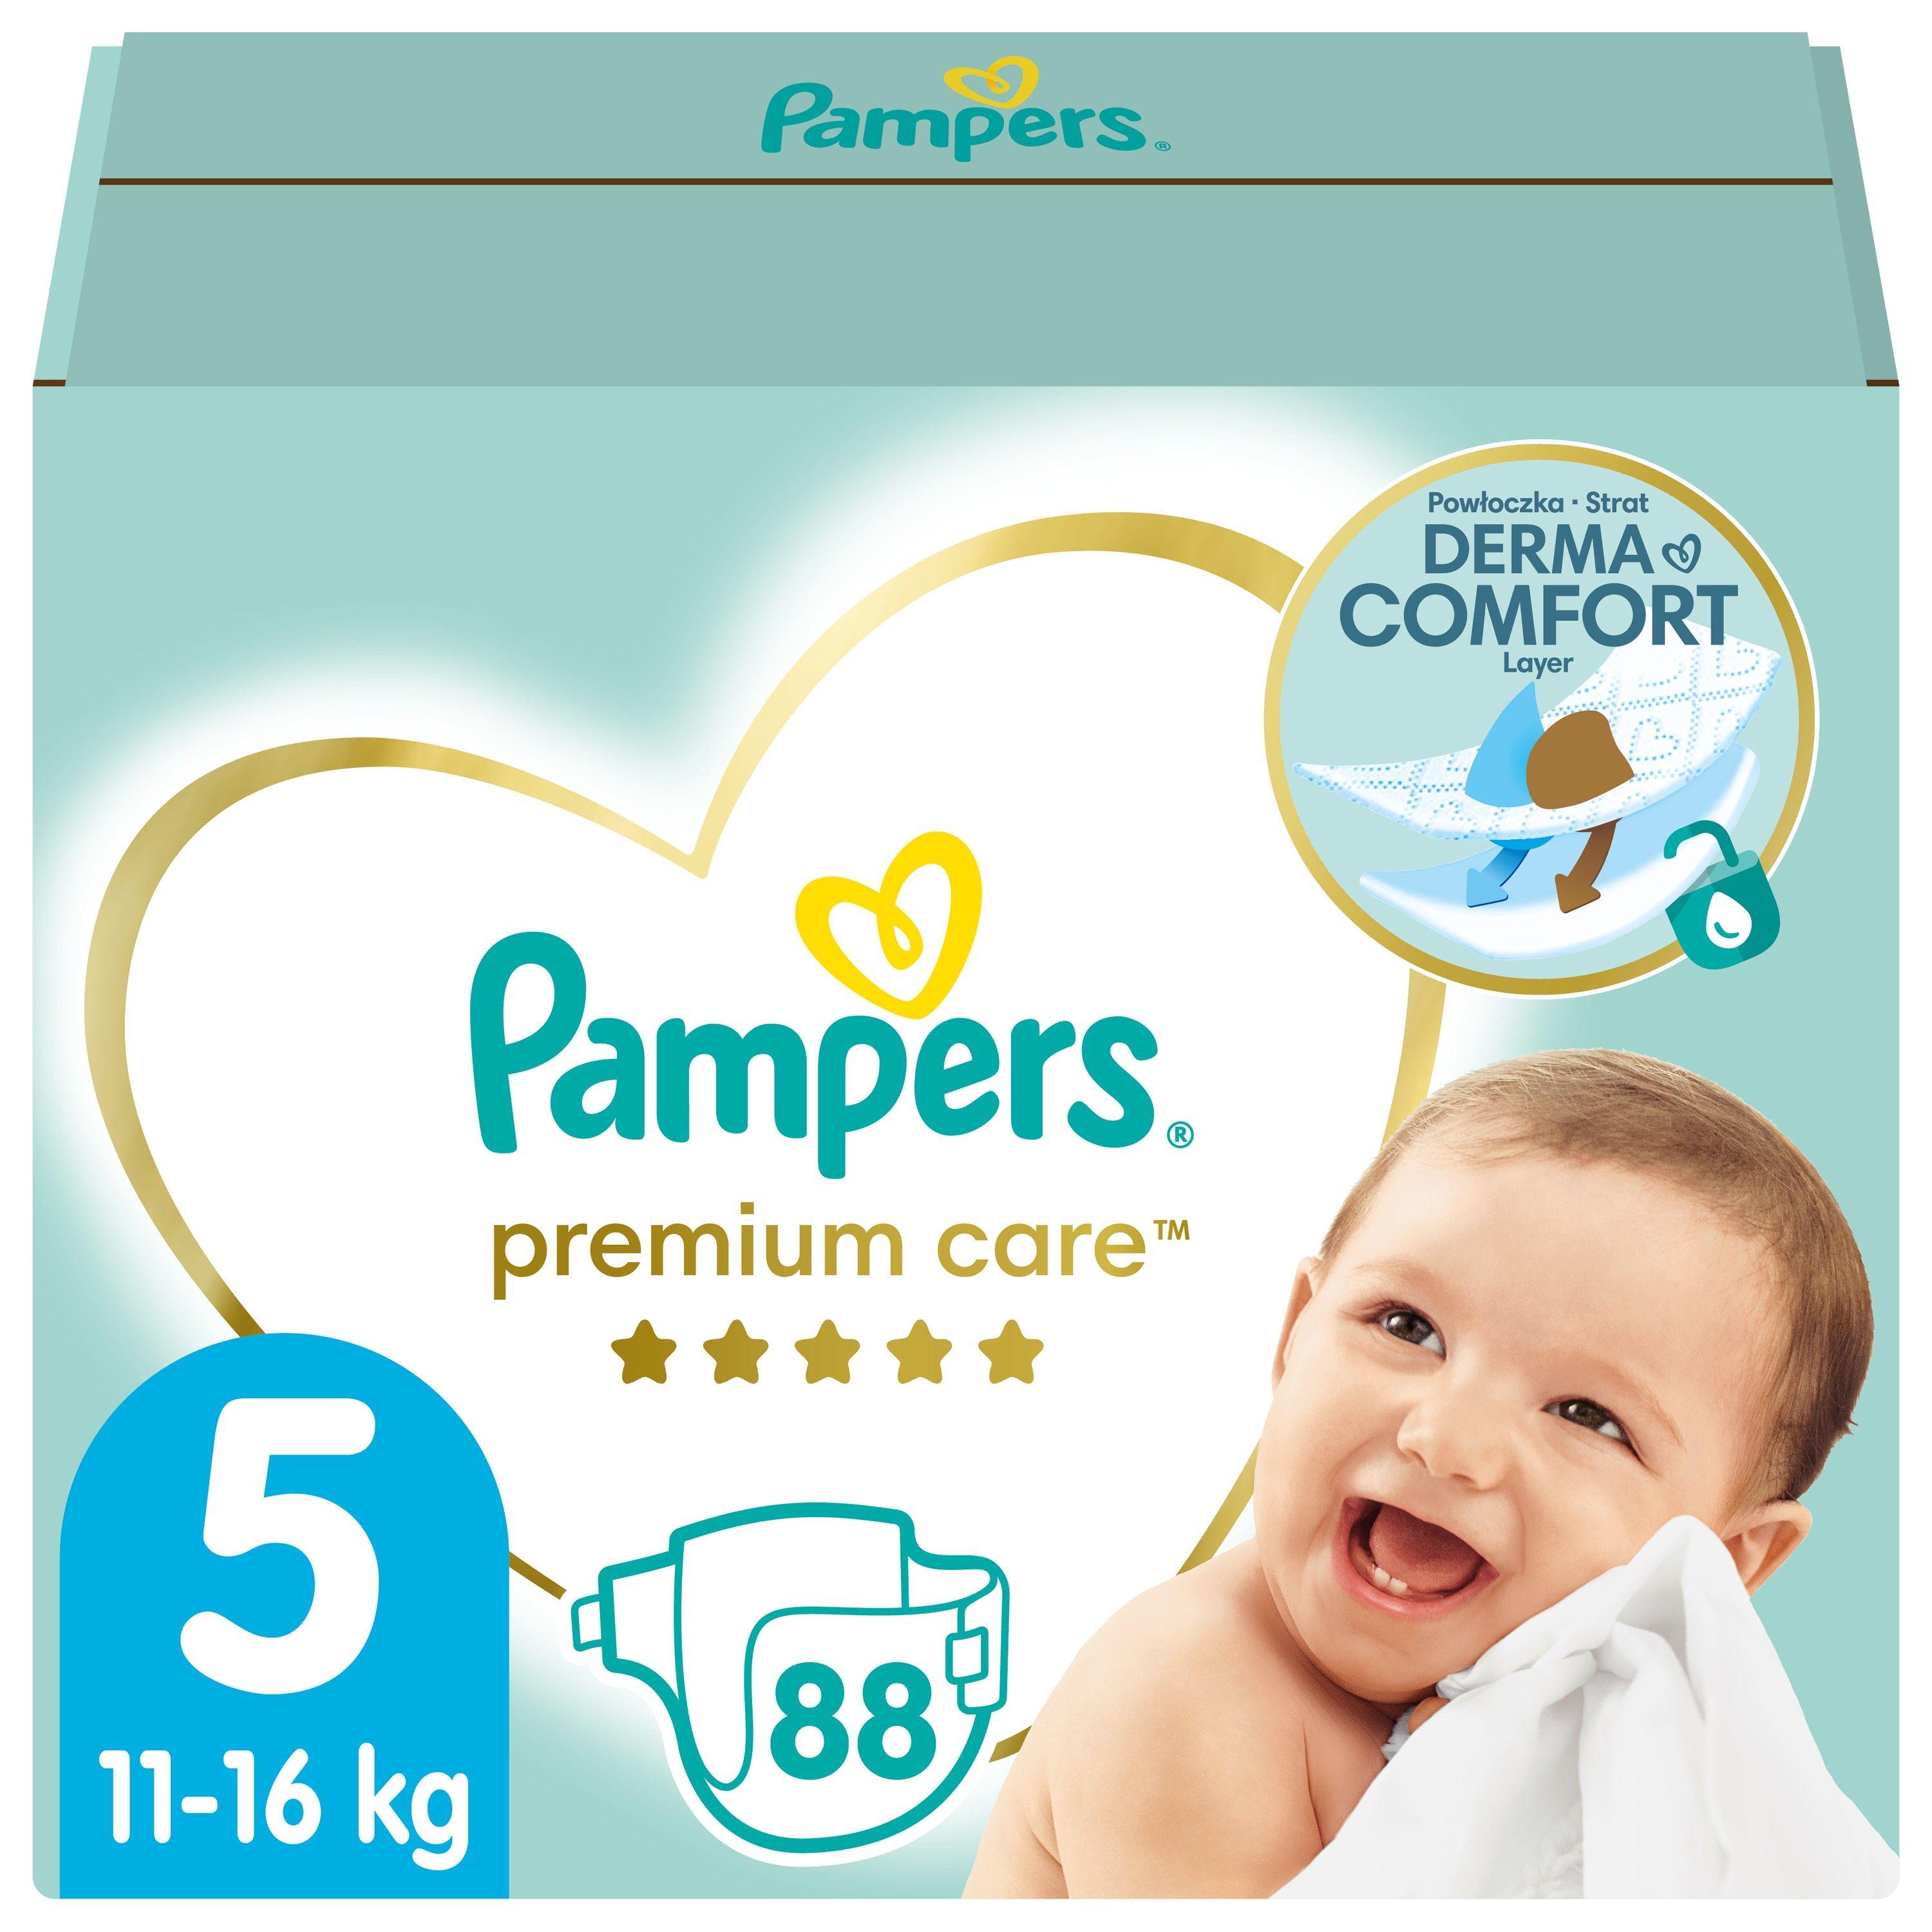 pampers active jumbo pack 5 72 pcs